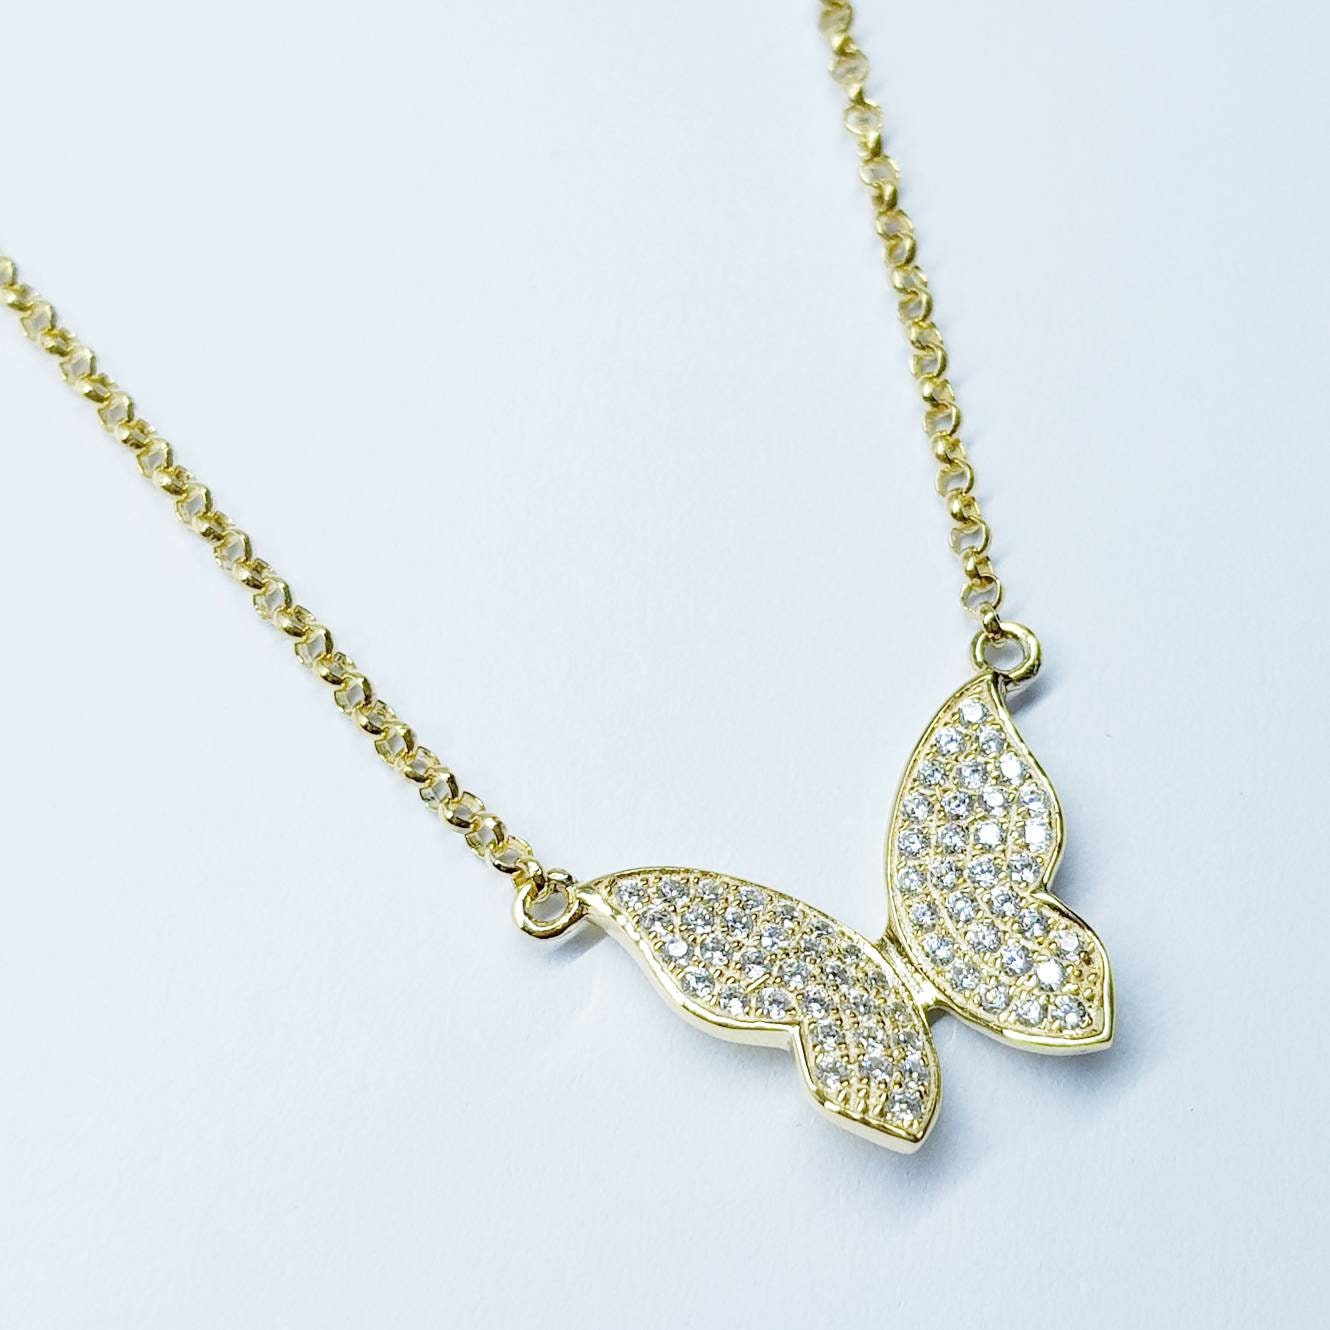 Butterfly necklace, yellow gold plated dainty butterfly pendant